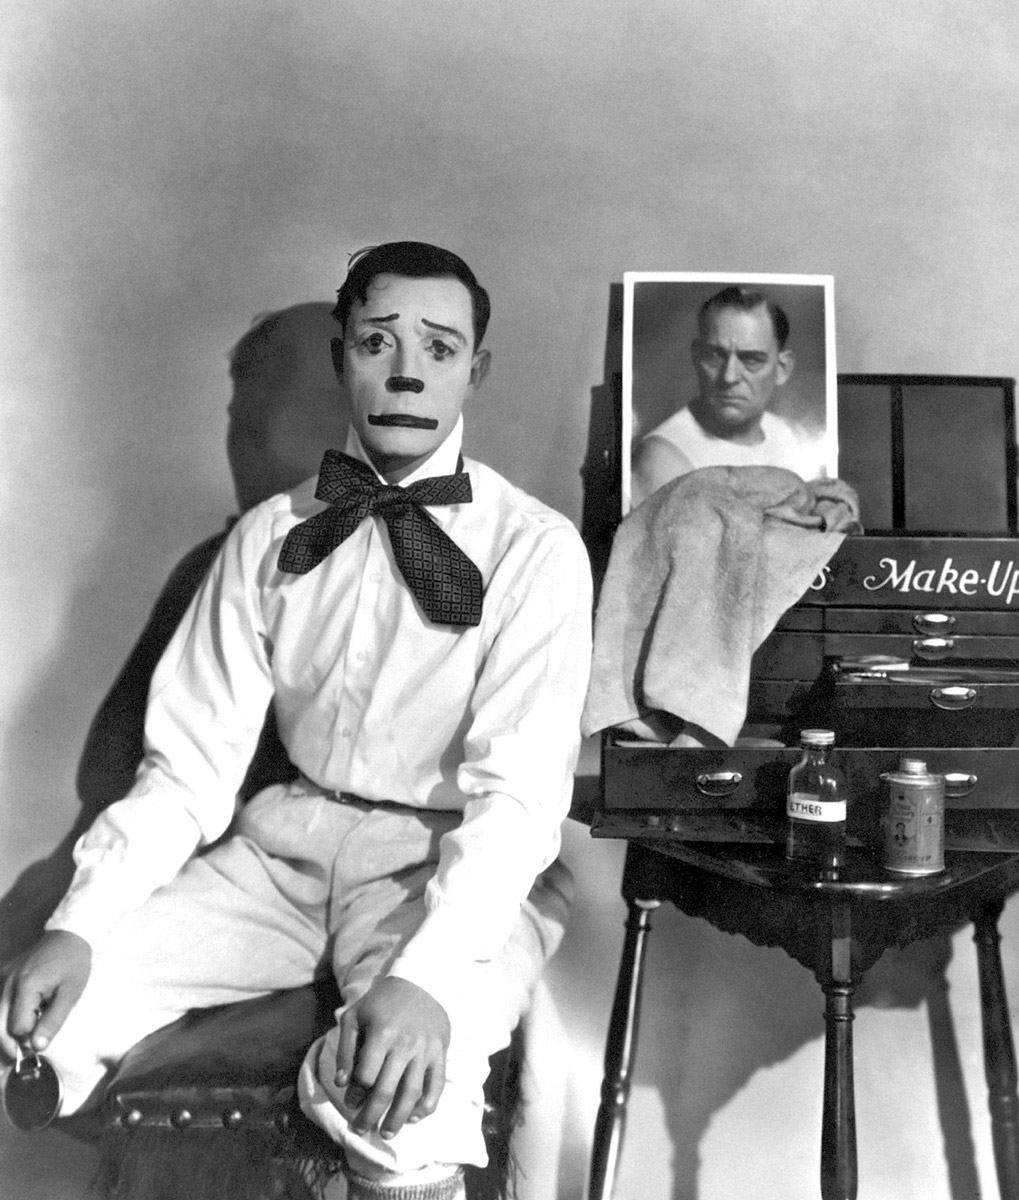 A publicity still of Keaton in clown makeup from the nineteen thirty film titled “Free and Easy”, Keaton’s first starring role in a talkie.